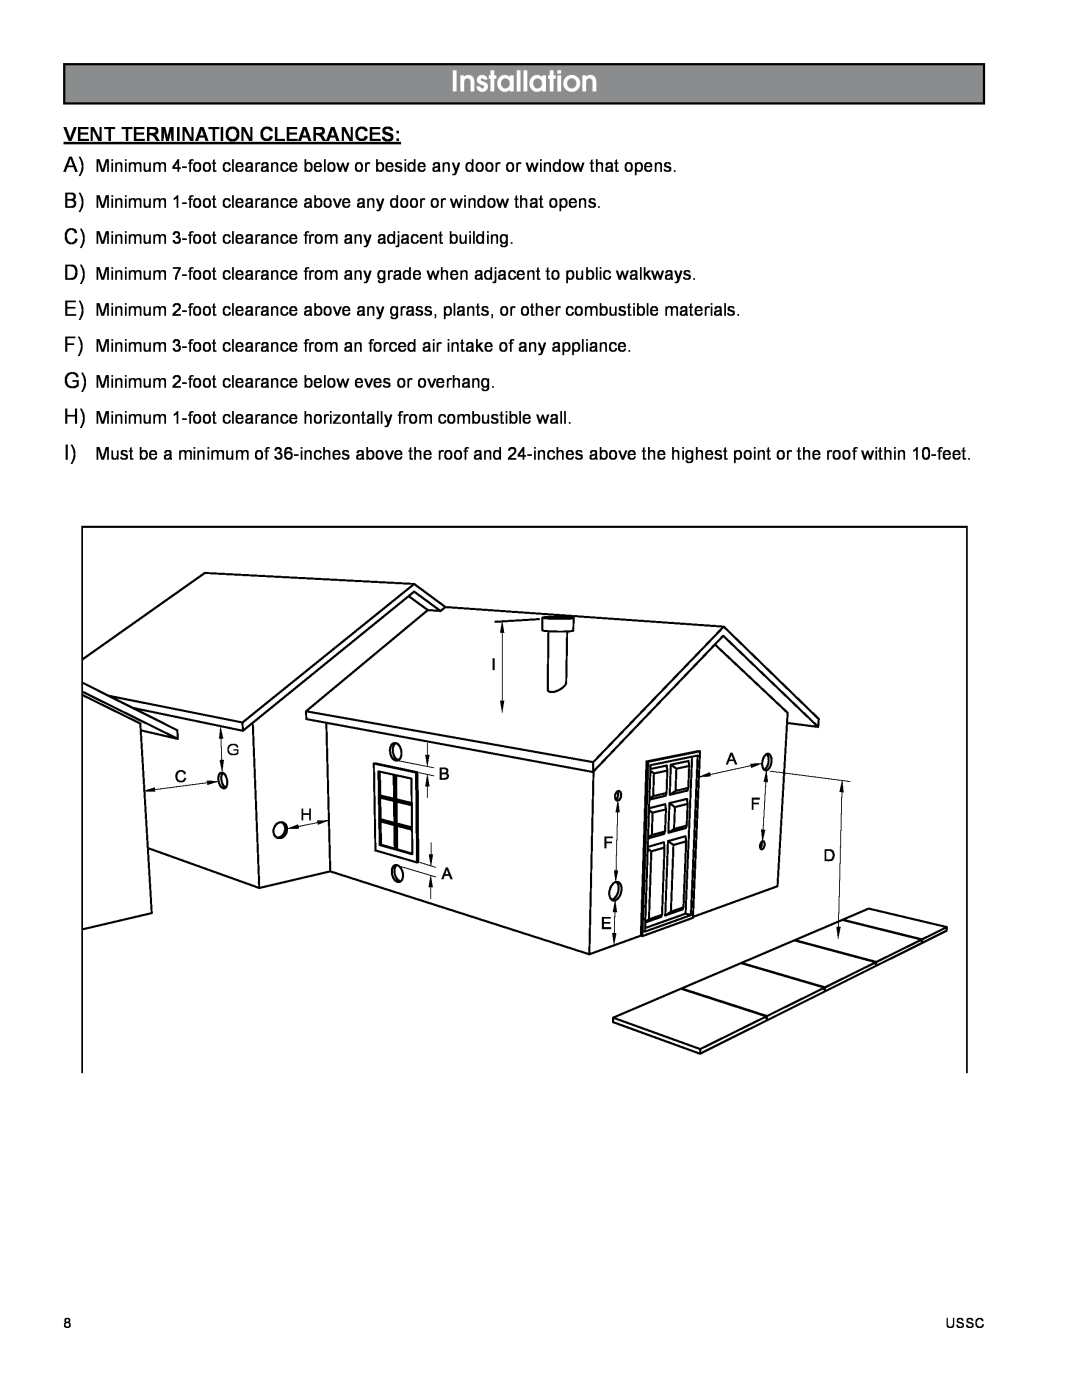 United States Stove 5510 owner manual Installation, Vent termination clearances 